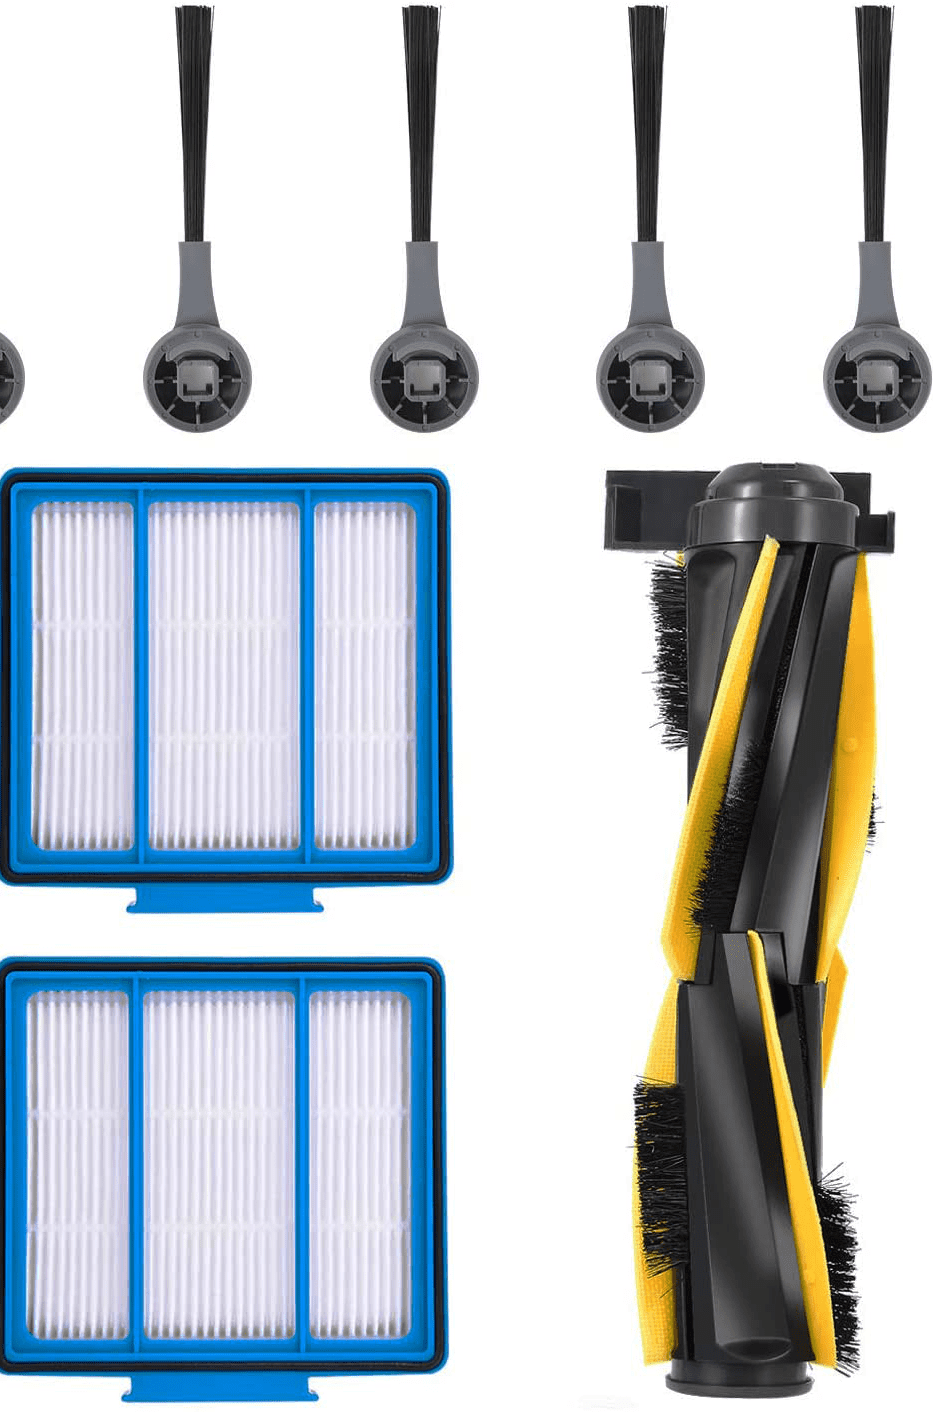 RV1001 Replacement Brush Filters Set For Shark IQ R101AE IQ R101 Vacuum Cleaner 